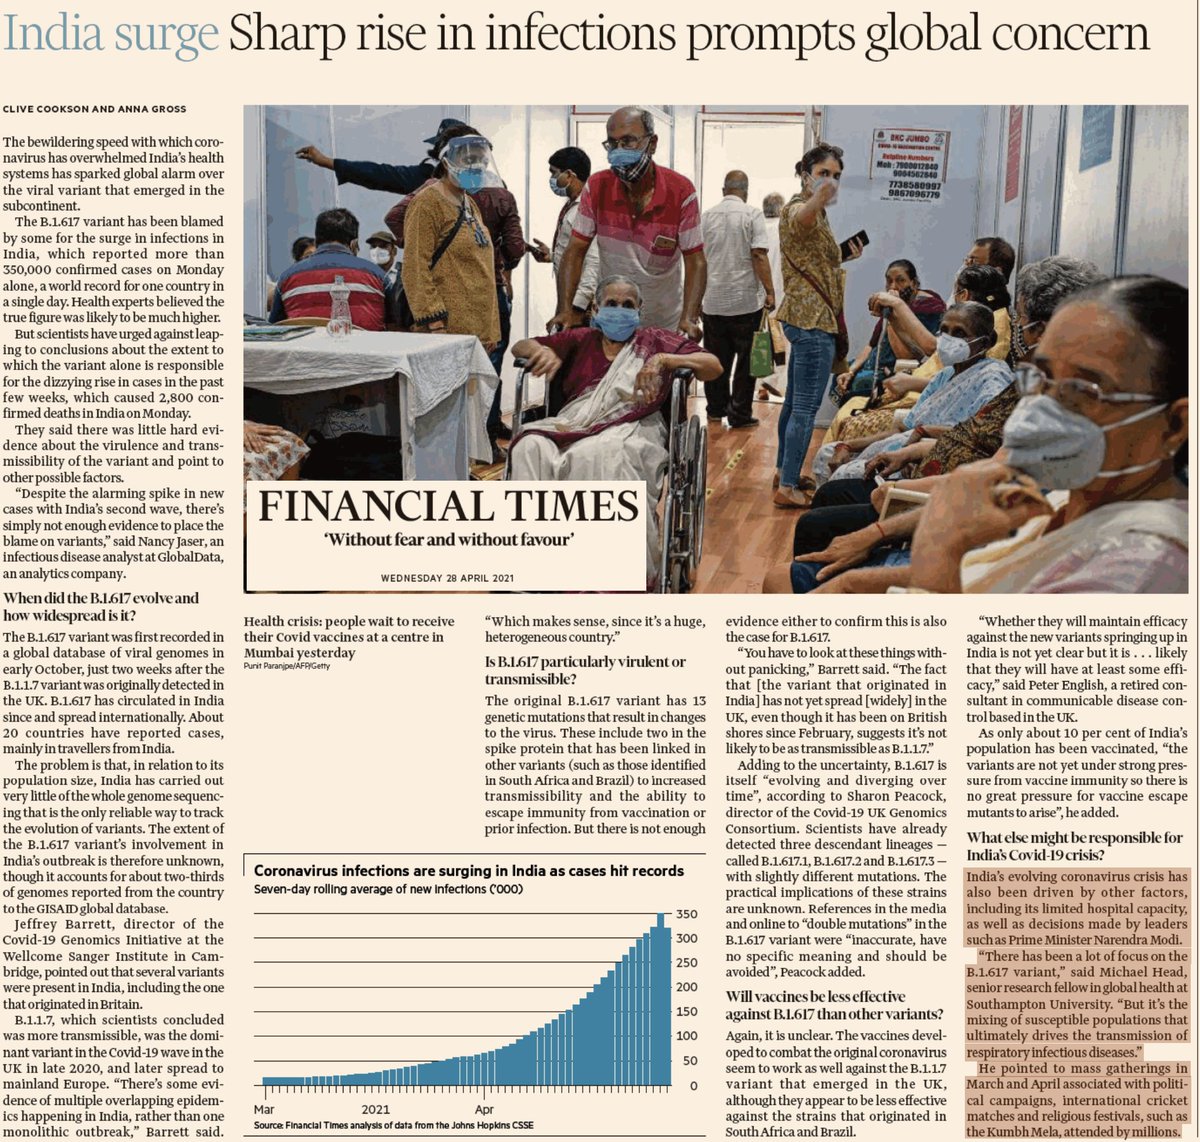 "India’s evolving coronavirus crisis has also been driven by other factors, including its low vaccination rate and limited hospital capacity, as well as decisions made by leaders such as Narendra Modi, and the tolerance of large political and religious gatherings"